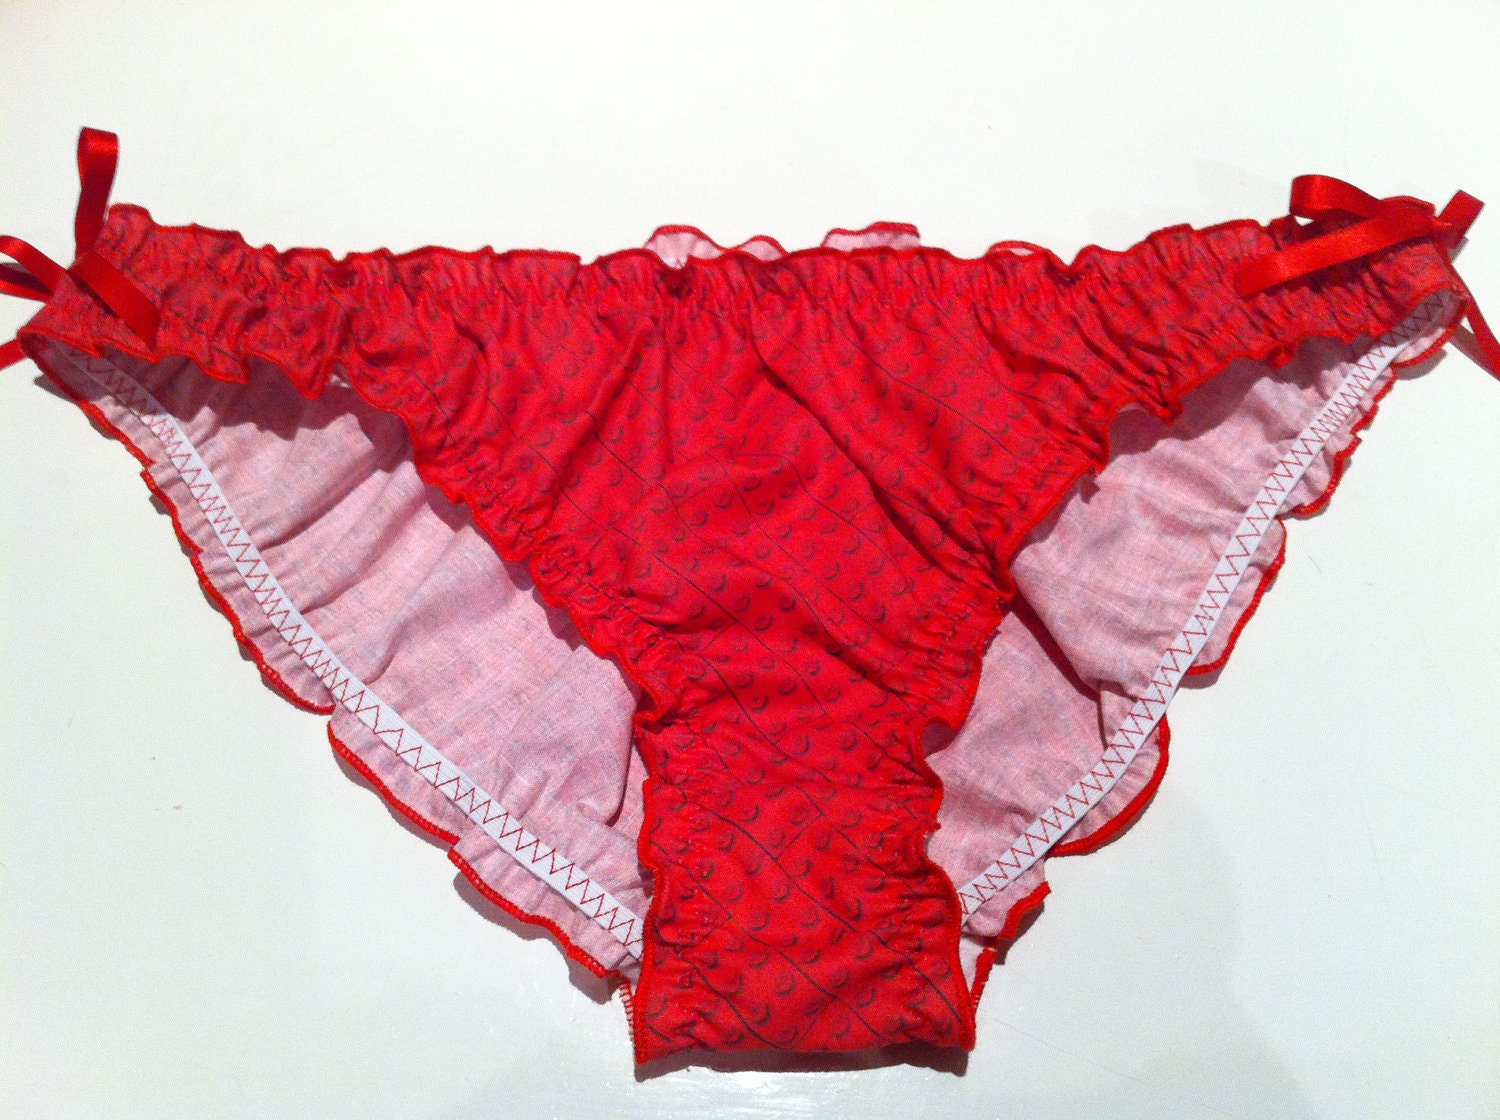 Red Lego panties - Made to order